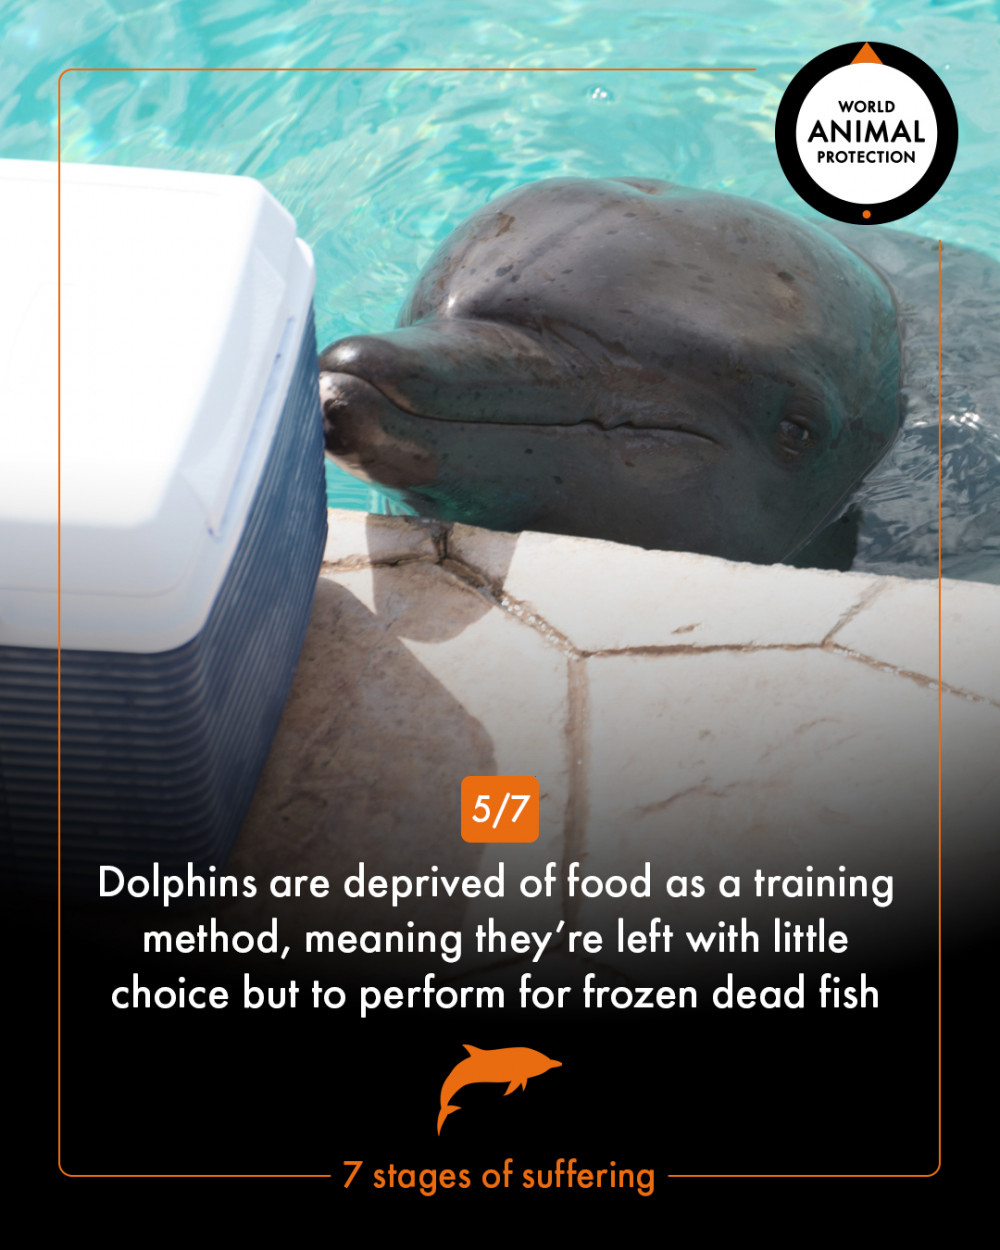 7 stages of dolphin suffering - World Animal Protection